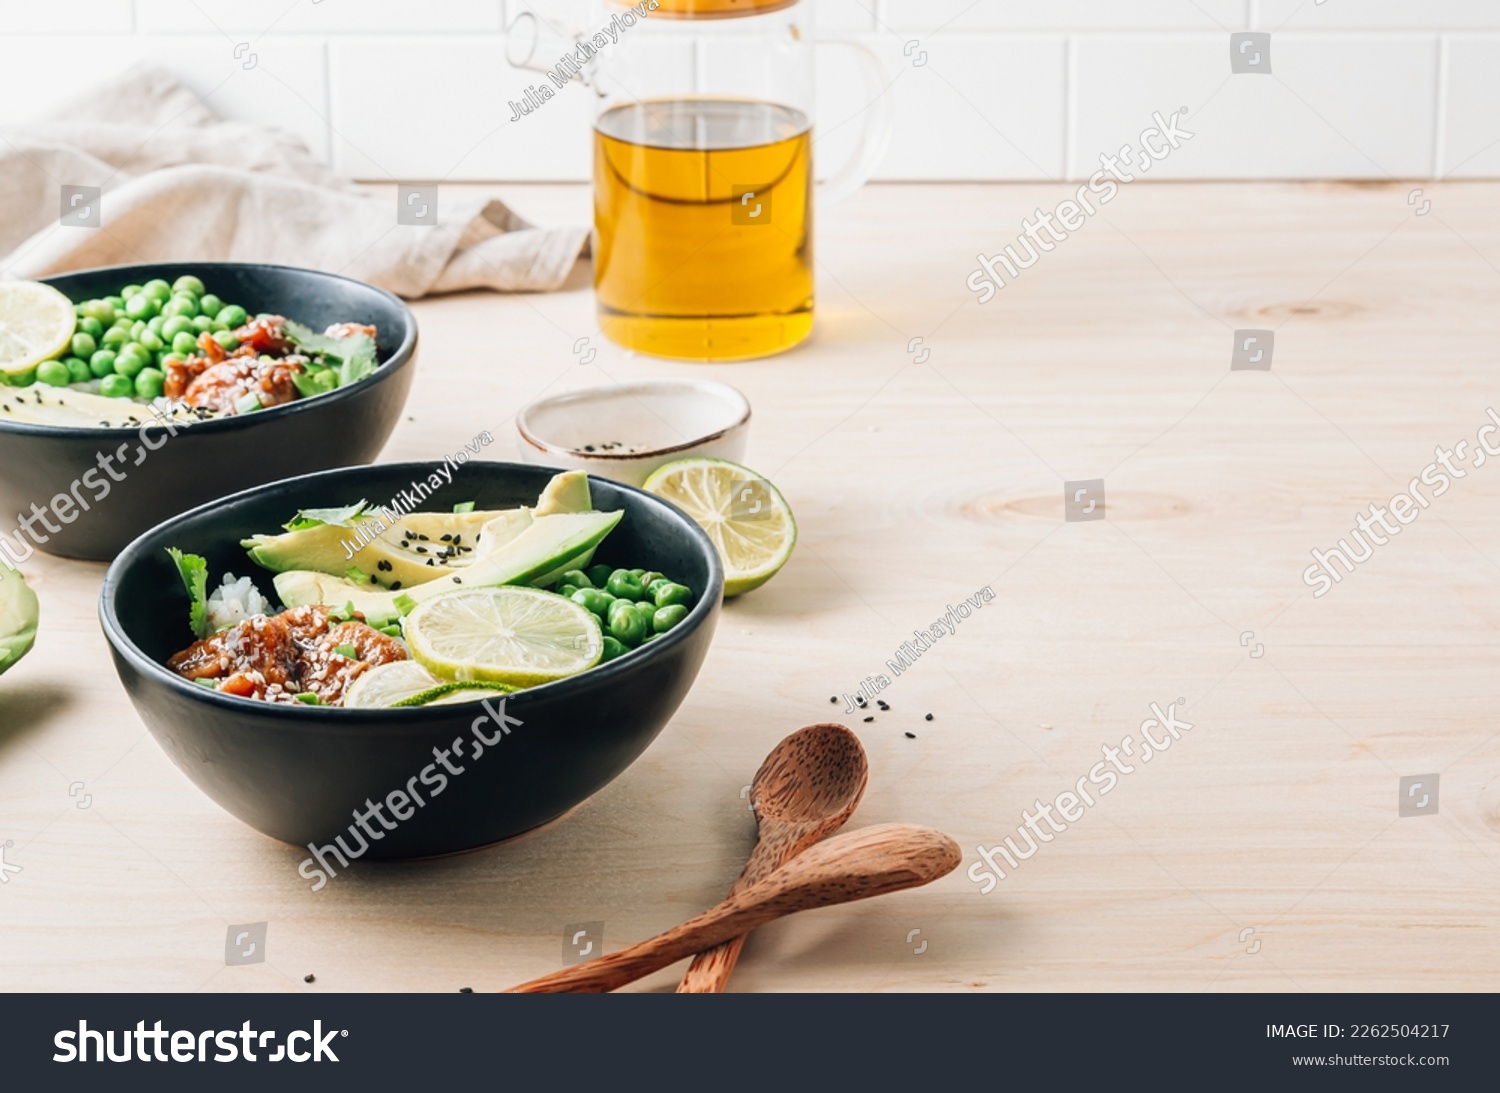 Buddha bowl with crispy sesame chicken. Sweet and sour fried chicken with steamed rice, peas and acocado on light wooden background. Healthy and balanced food concept. Selective focus with copy space #2262504217